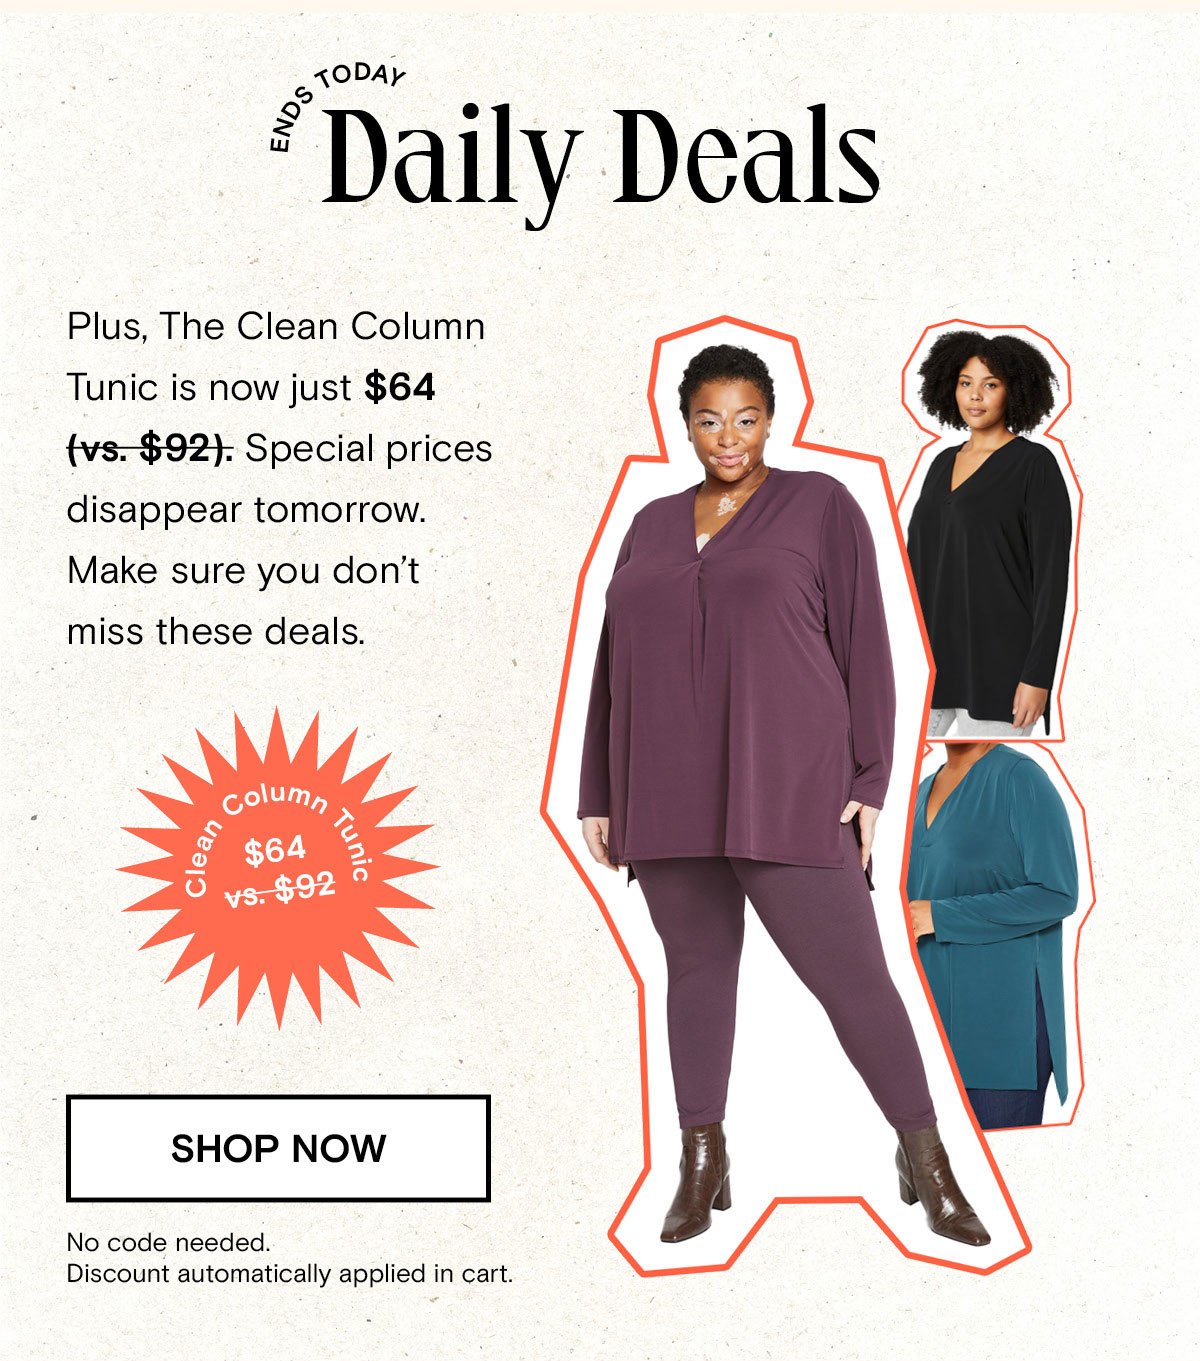 Get the clean column tunic for $64 today only!